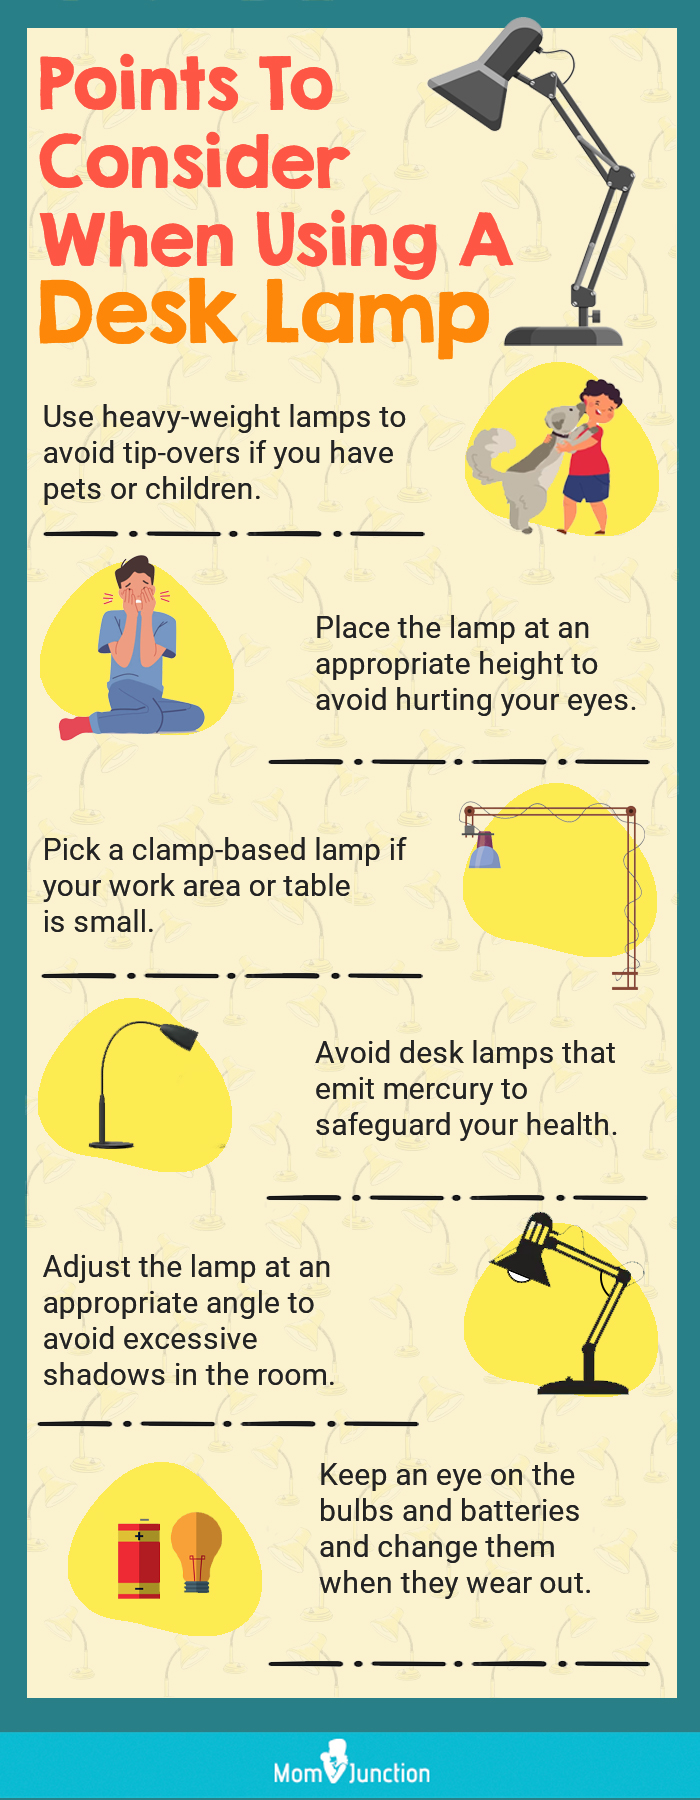 Points To Consider When Using A Desk Lamp (infographic)